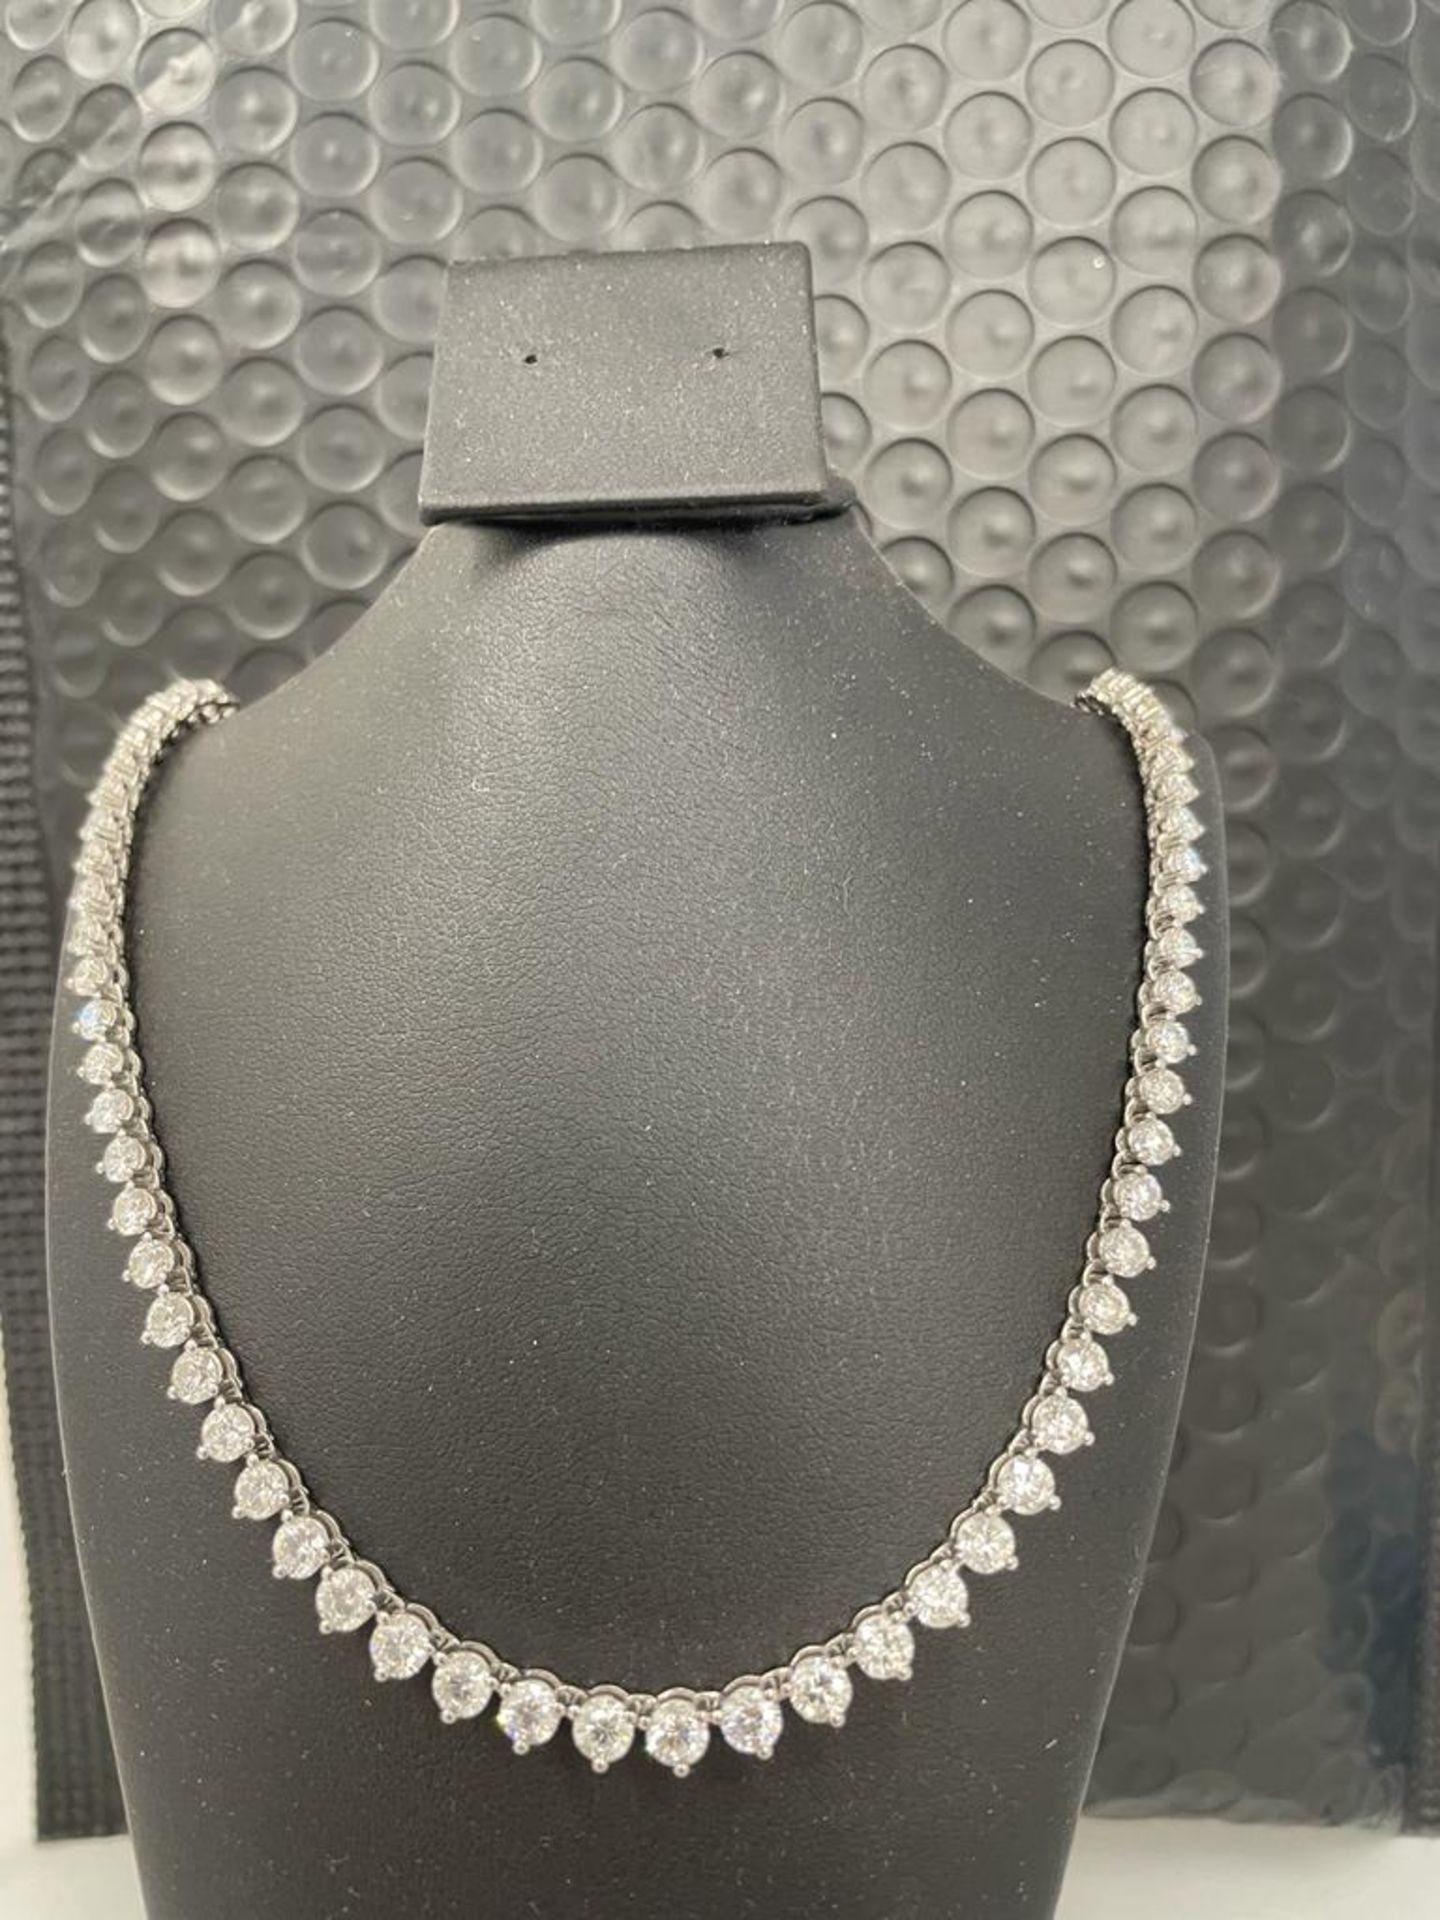 AN 18 CARAT WHITE GOLD DIAMOND NECKLACE, 17 INCH LENGTH WITH APPROXIMATELY 12 TO 14 CARAT OF CLAW